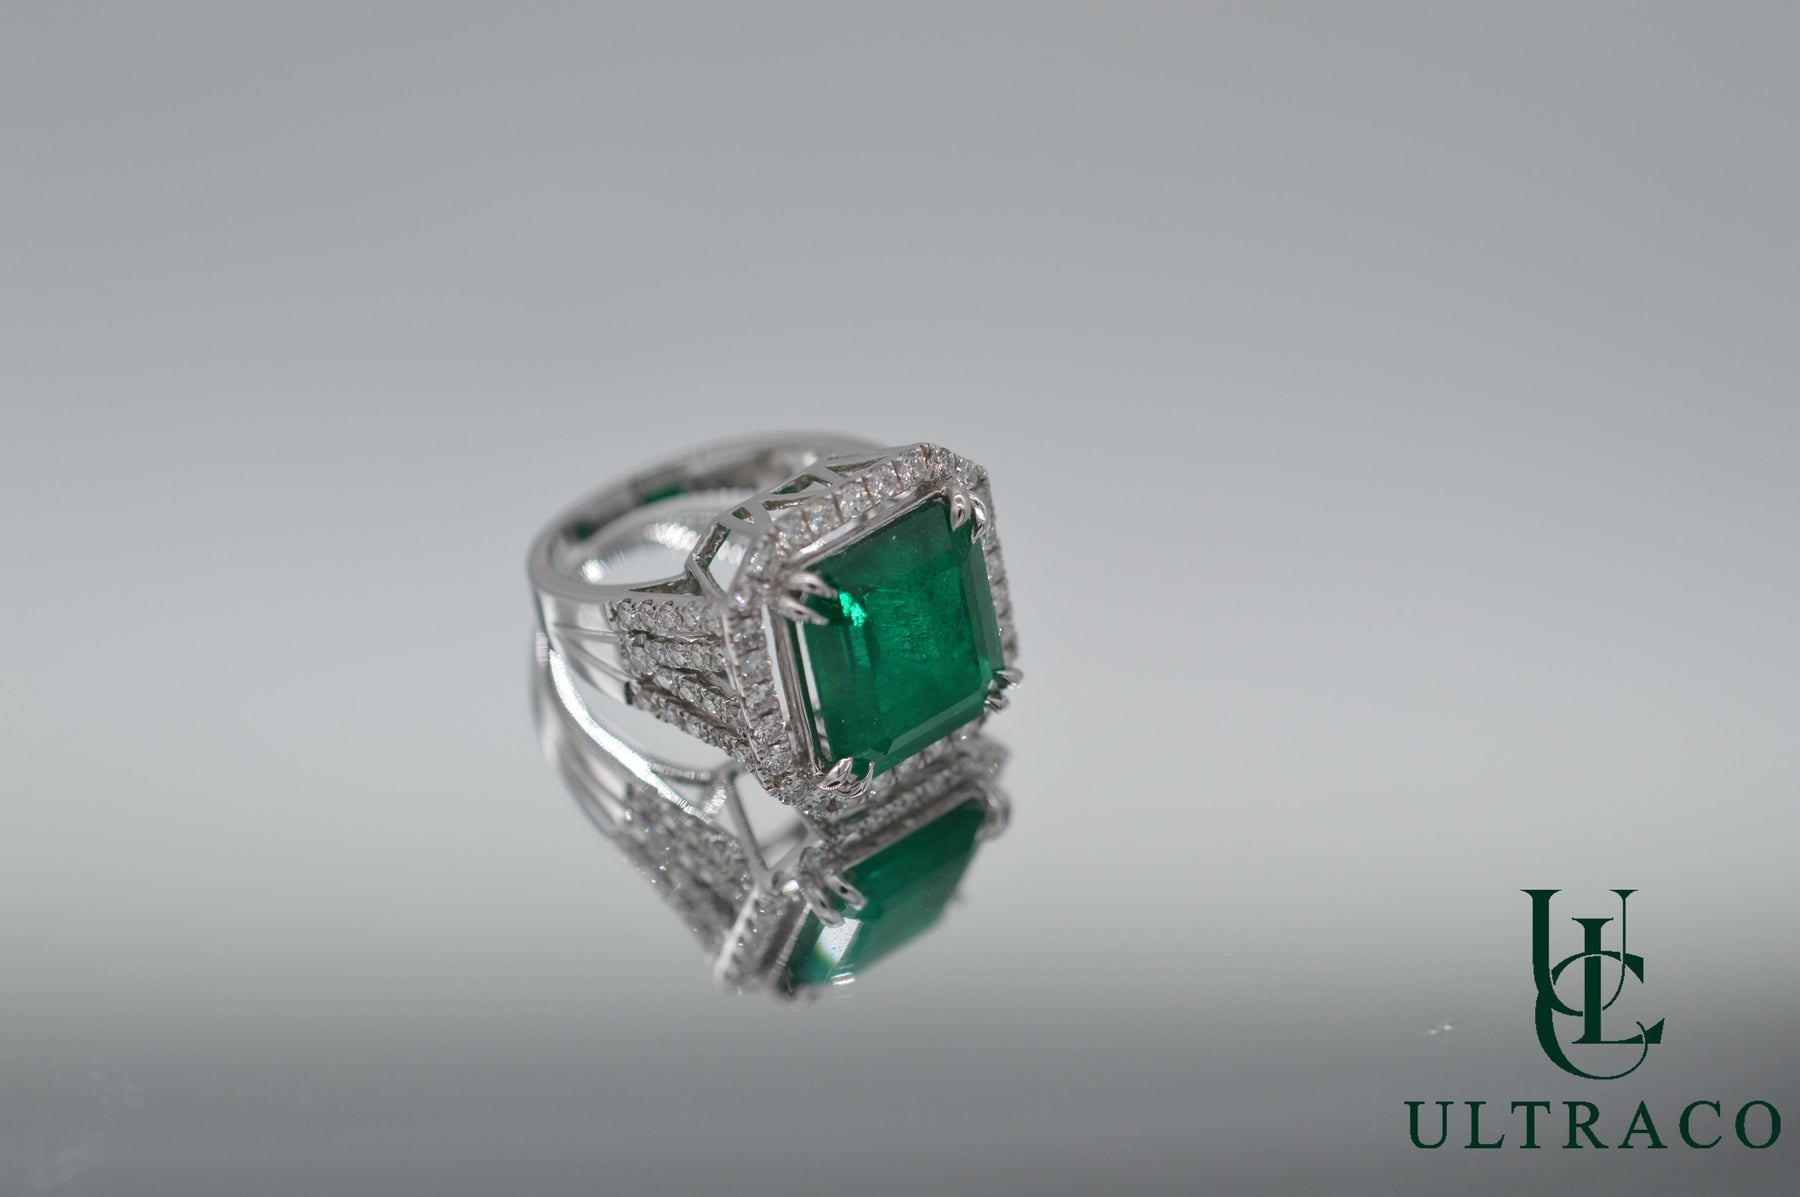 Colombian Emerald With Diamonds Set In 18K White Gold